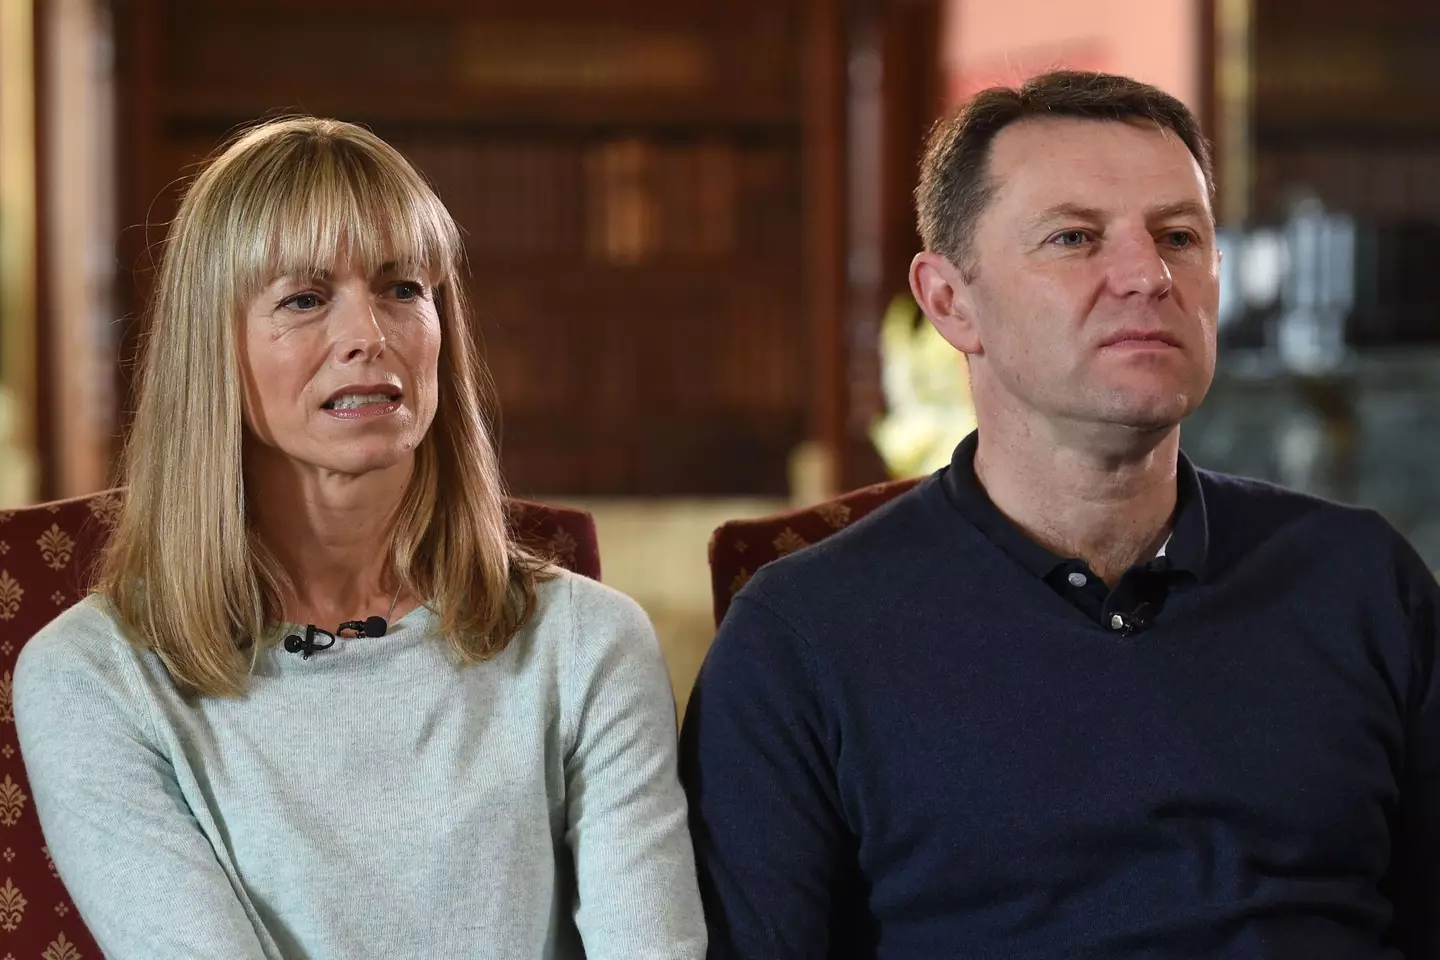 Gerry and Kate McCann have responded to their libel case against a former detective being overturned.